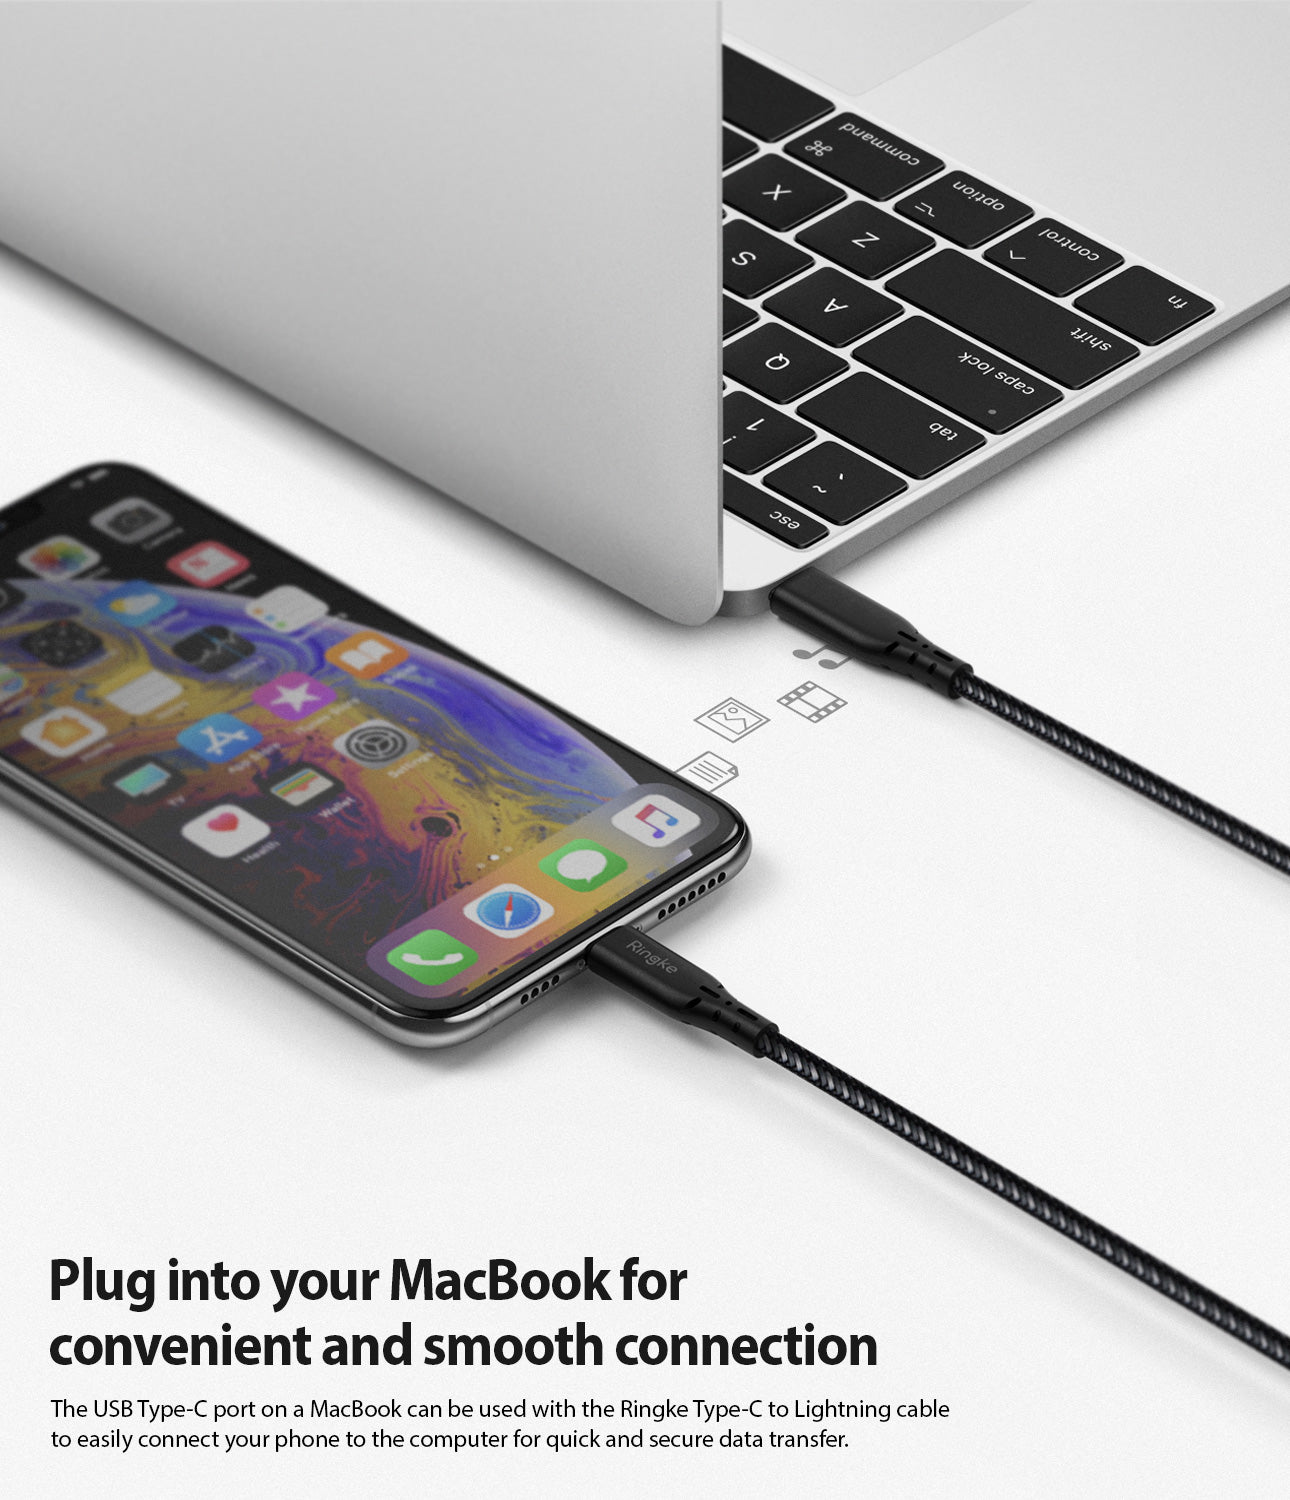 plug into your macbook for convenient and smooth connection